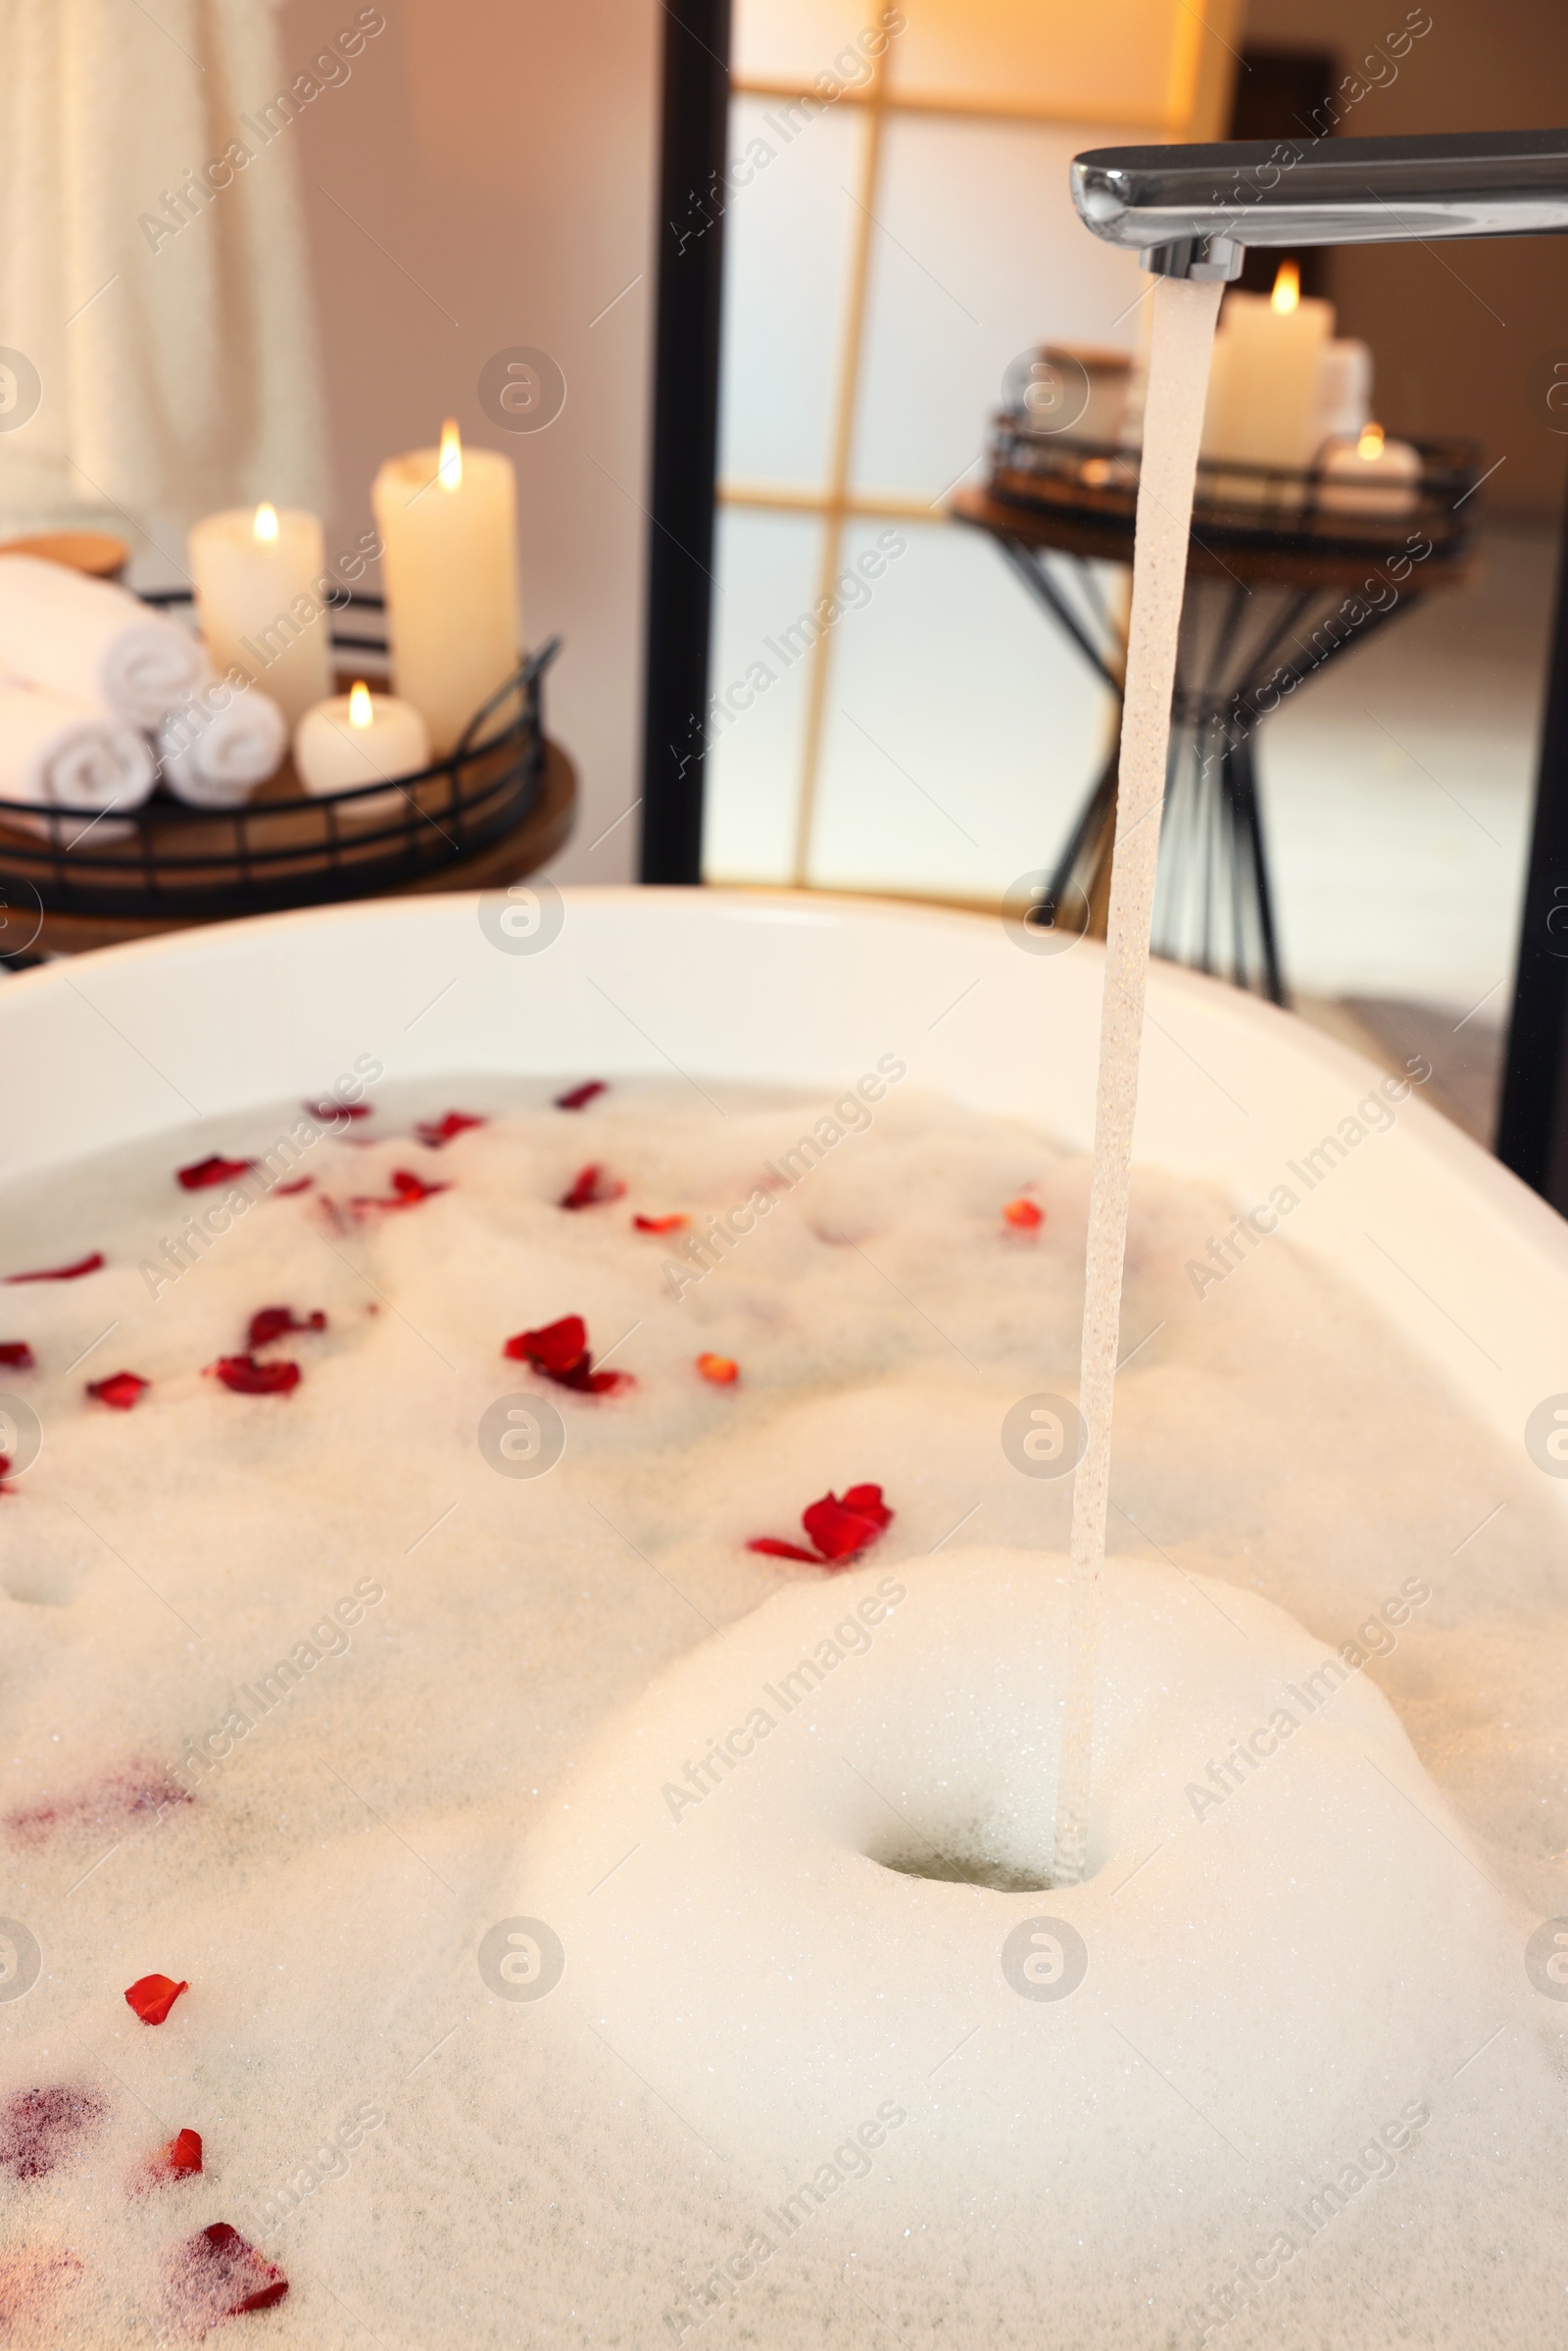 Photo of Water pouring into bath tub with foam and red rose petals in bathroom